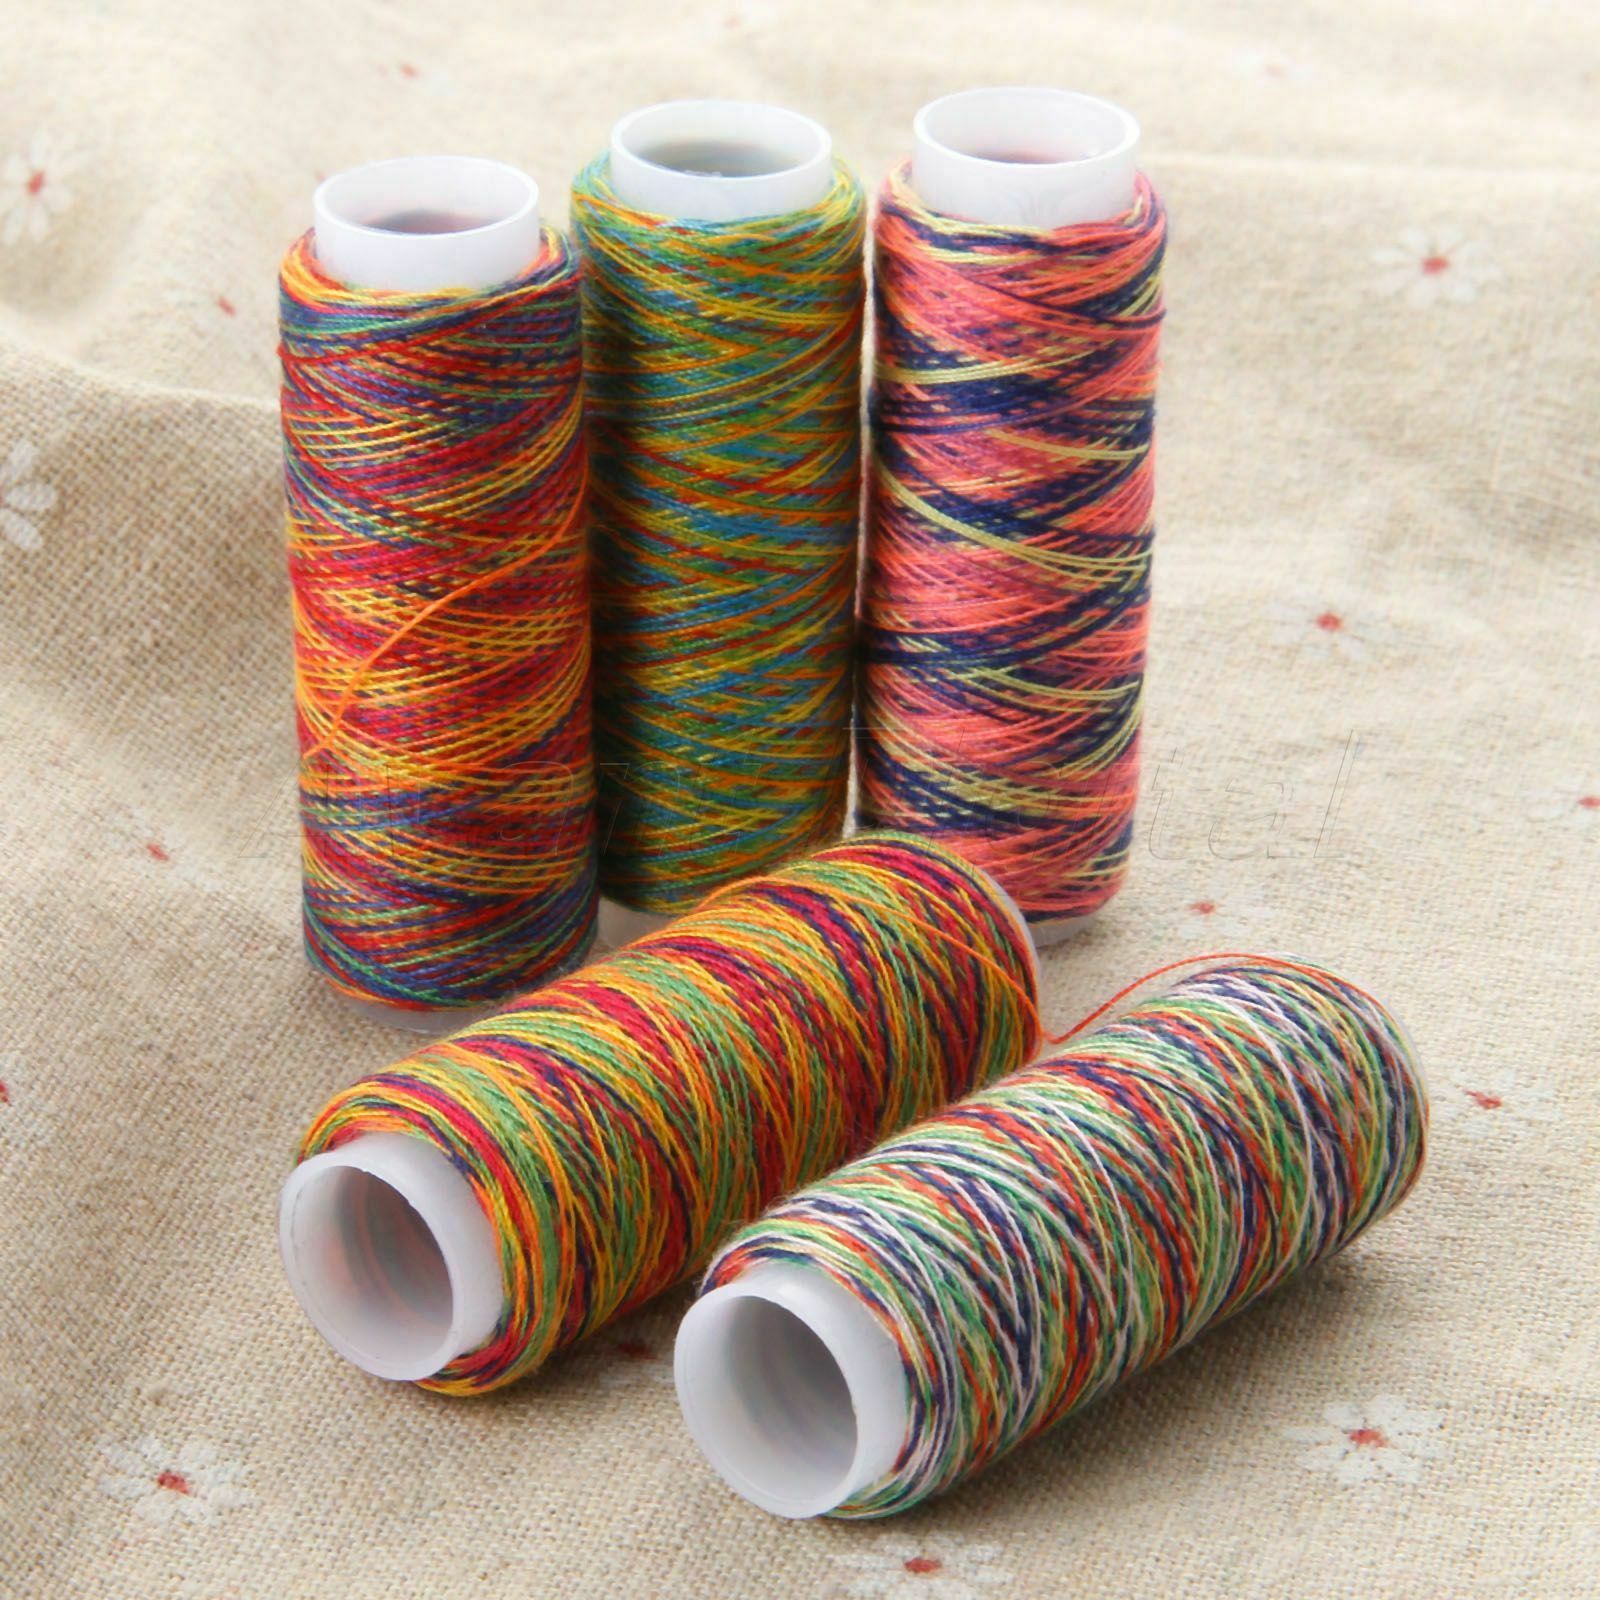 5pcs Hand Quilting Embroidery Sewing Threads Craft DIY Sewing Decor Stitching